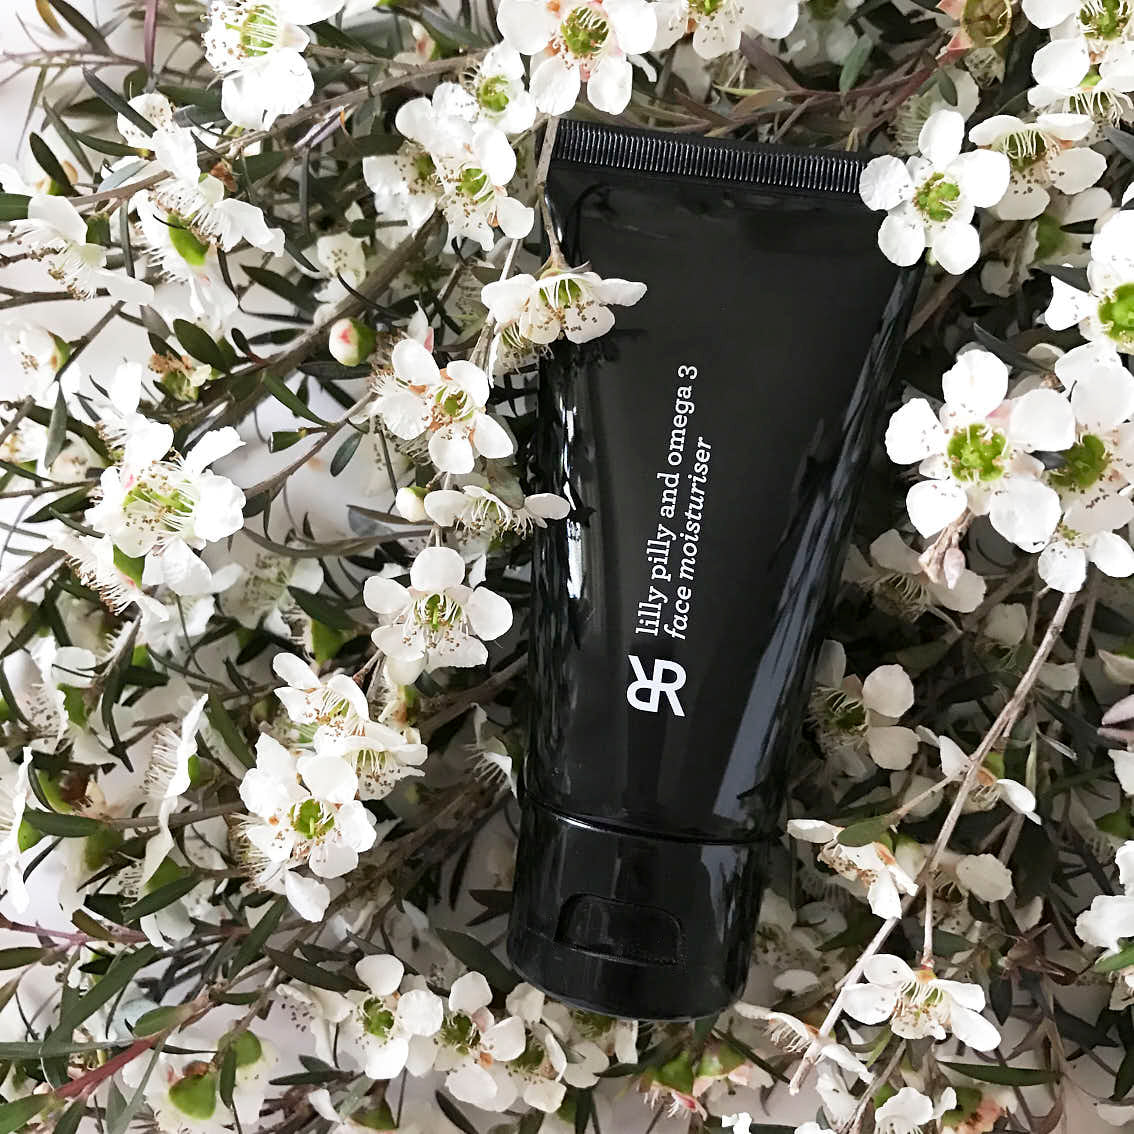 Lily Pilly face cream – Rohr Remedy natural skincare